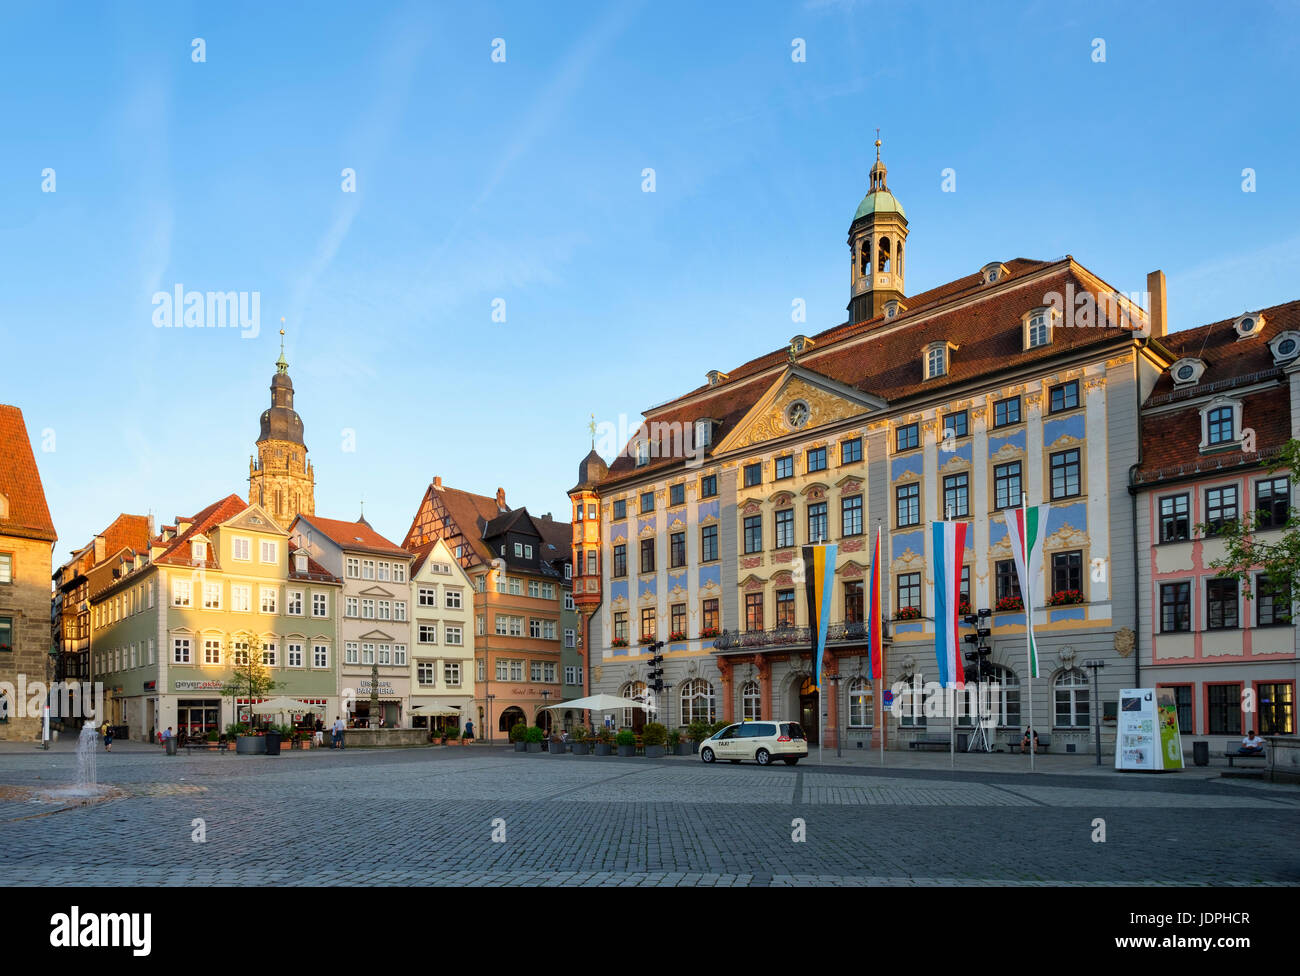 Town Hall on the market square with church St. Moritz, Coburg, Upper Franconia, Franconia, Bavaria, Germany Stock Photo